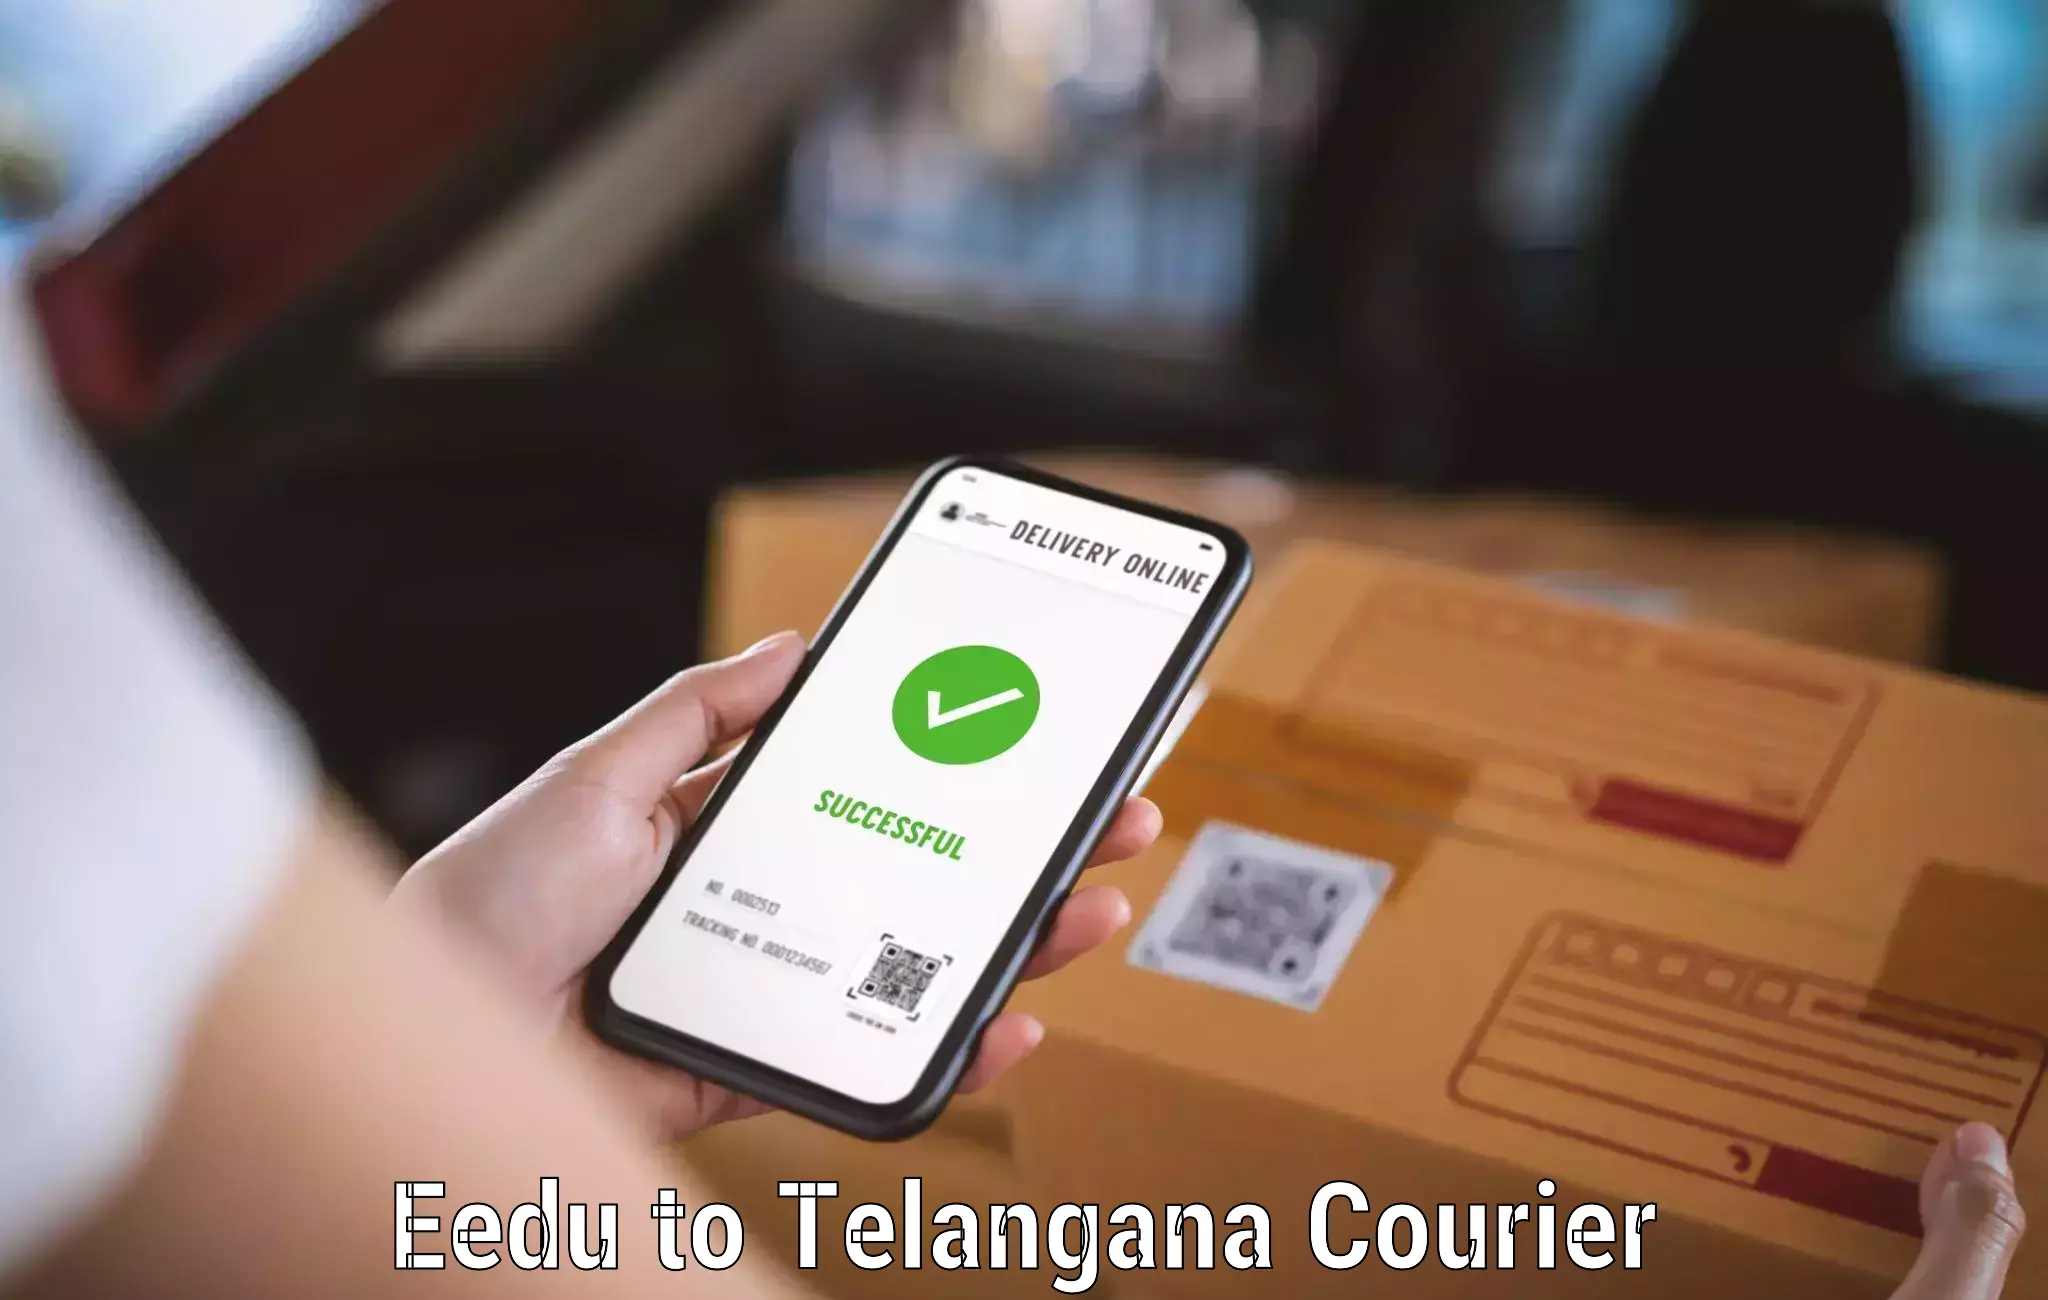 Customizable delivery plans Eedu to Tadvai